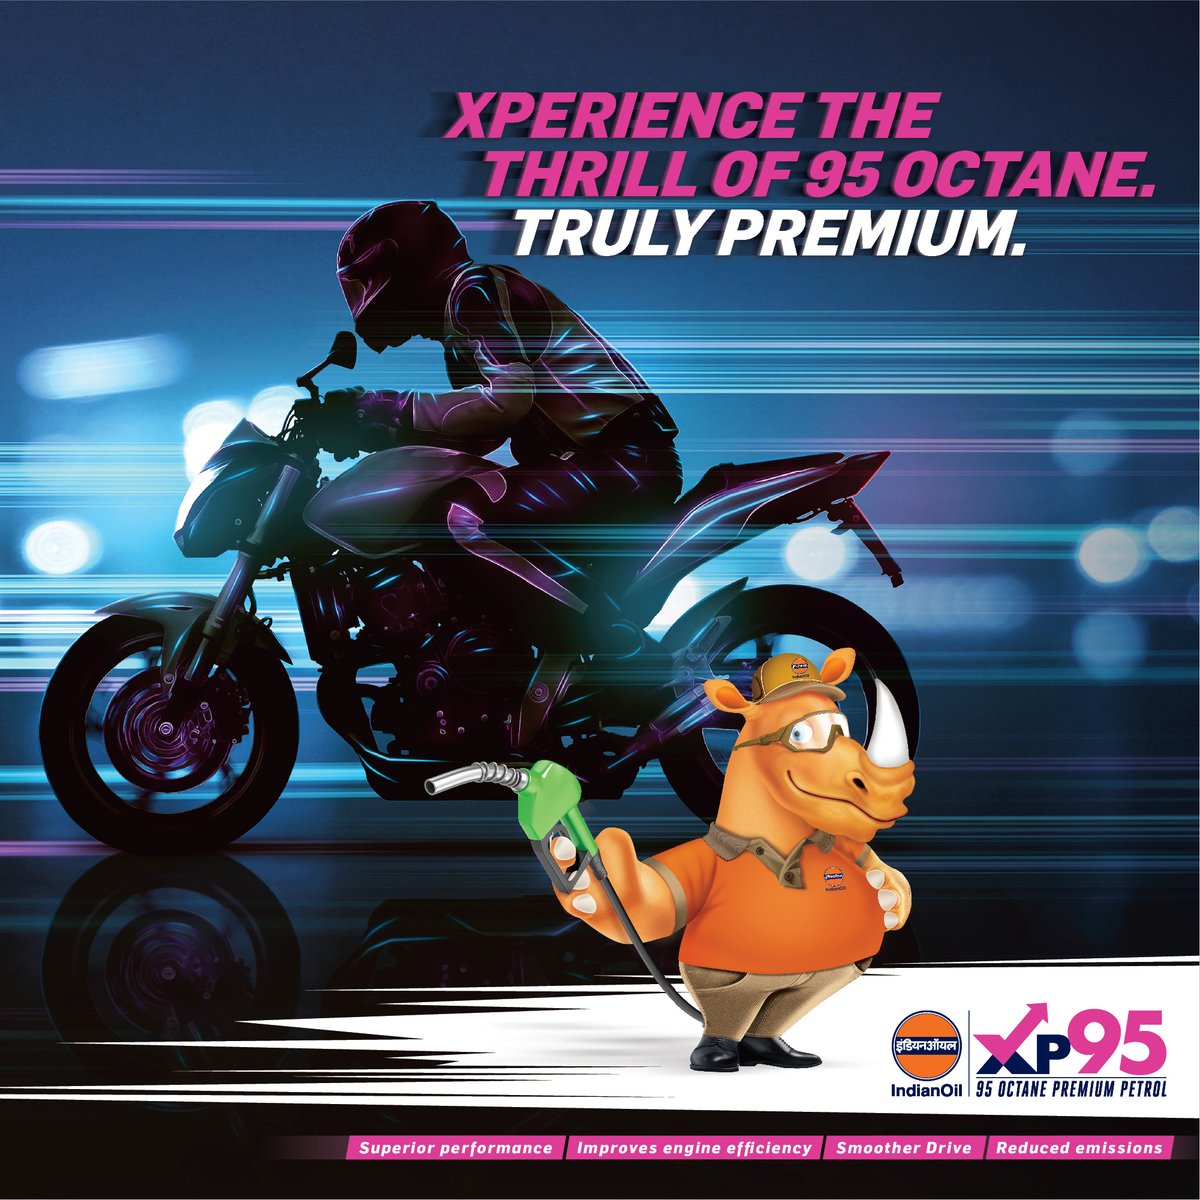 Master the road with the all-new #XP95 ! The 95 Octane Premium Petrol from IndianOil.​ Experience the thrill of Octane 95 with superior performance, better mileage & reduced emissions. Let the smoother rides begin.​ #IndianOil